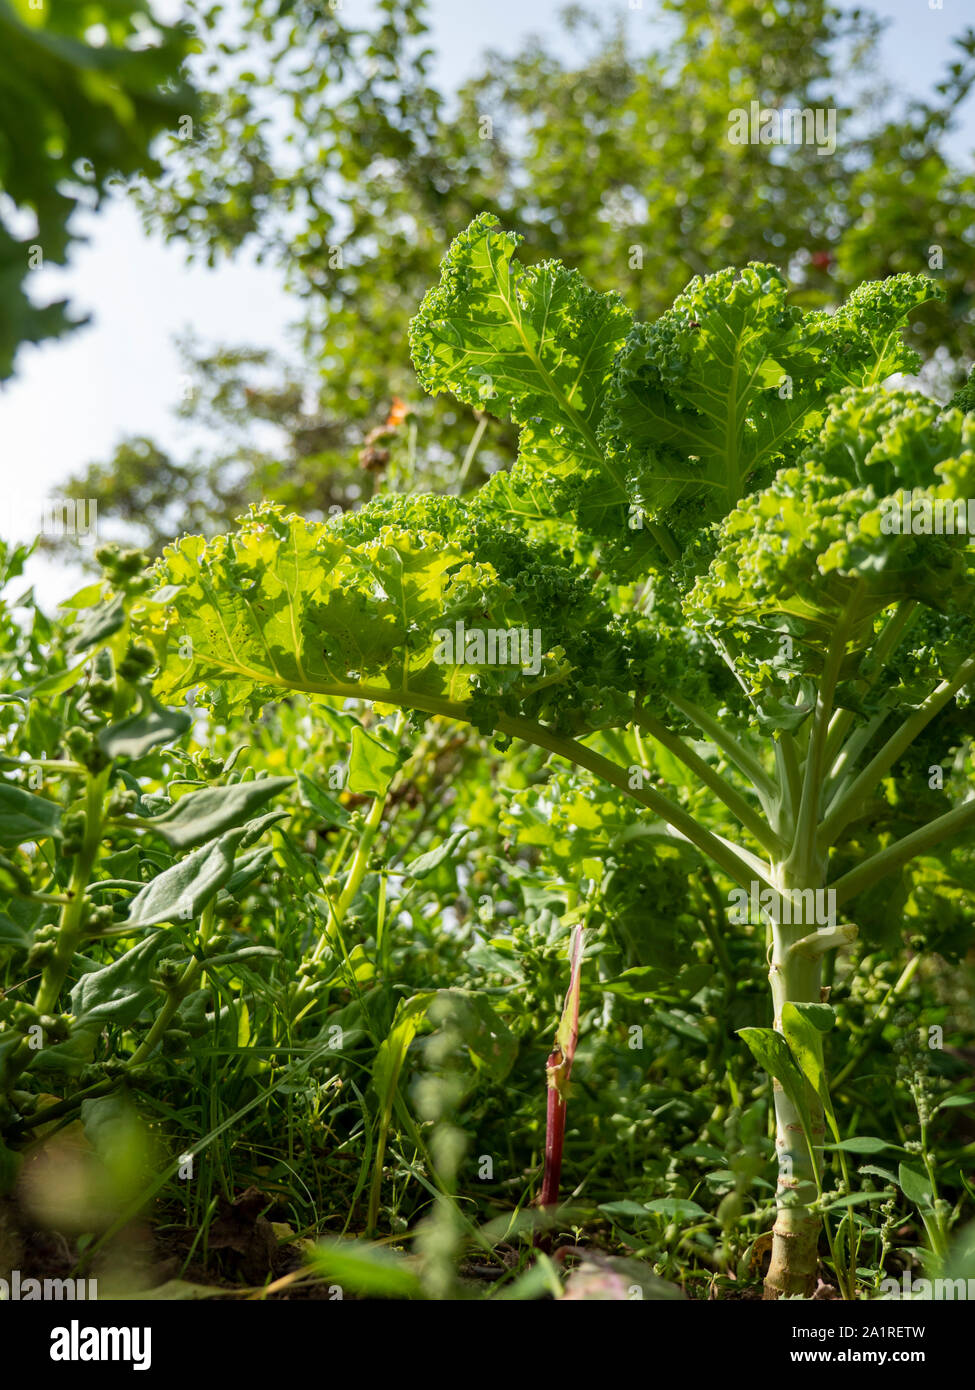 Curly kale growing in a vegetable garden with New Zealand spinach (Tetragonia tetragonioides) in the background. Stock Photo